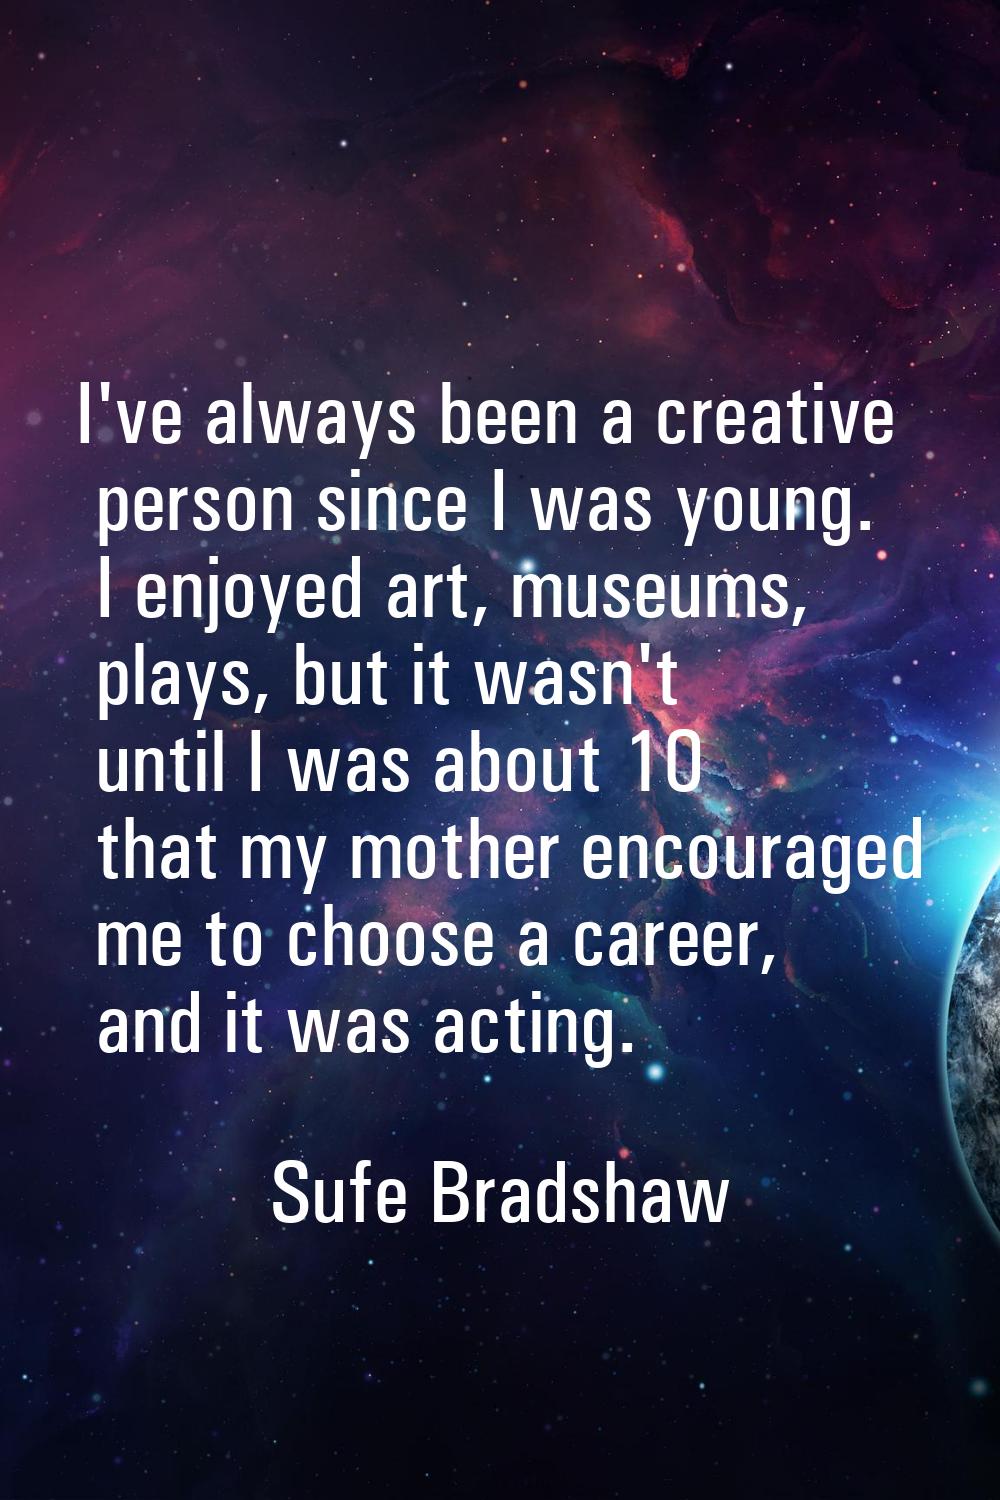 I've always been a creative person since I was young. I enjoyed art, museums, plays, but it wasn't 